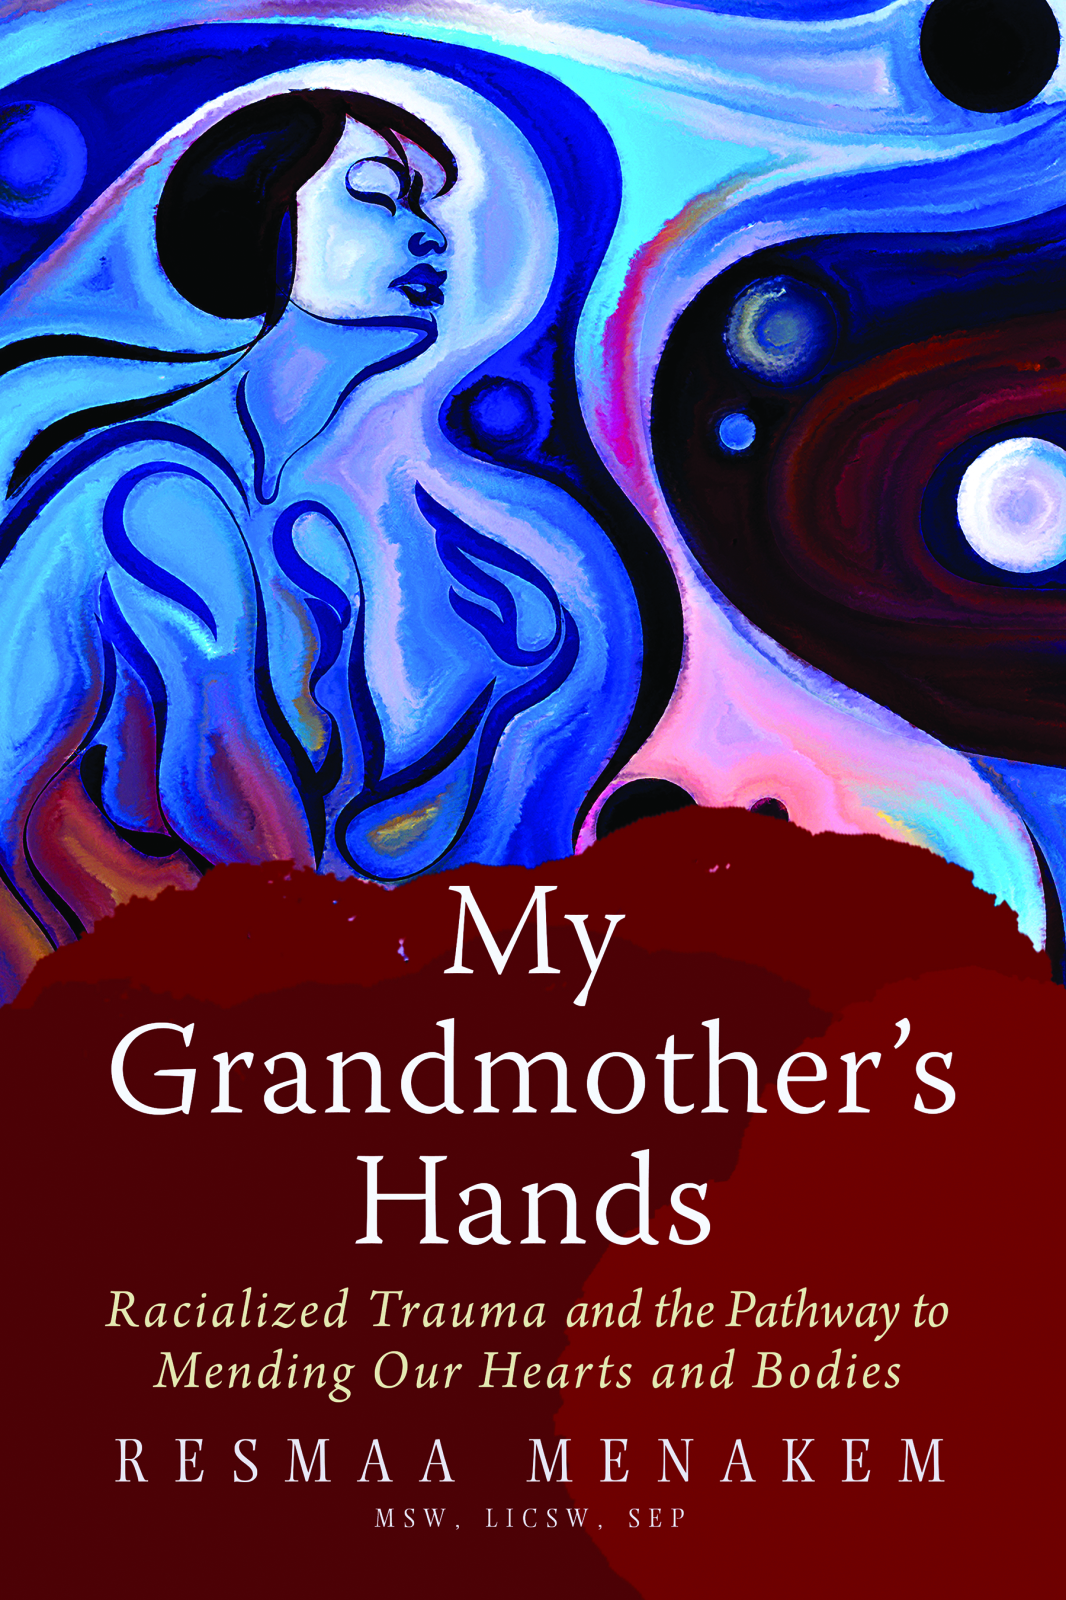 [EPUB] My Grandmother's Hands: Racialized Trauma and the Mending of Our Bodies and Hearts by Resmaa Menakem